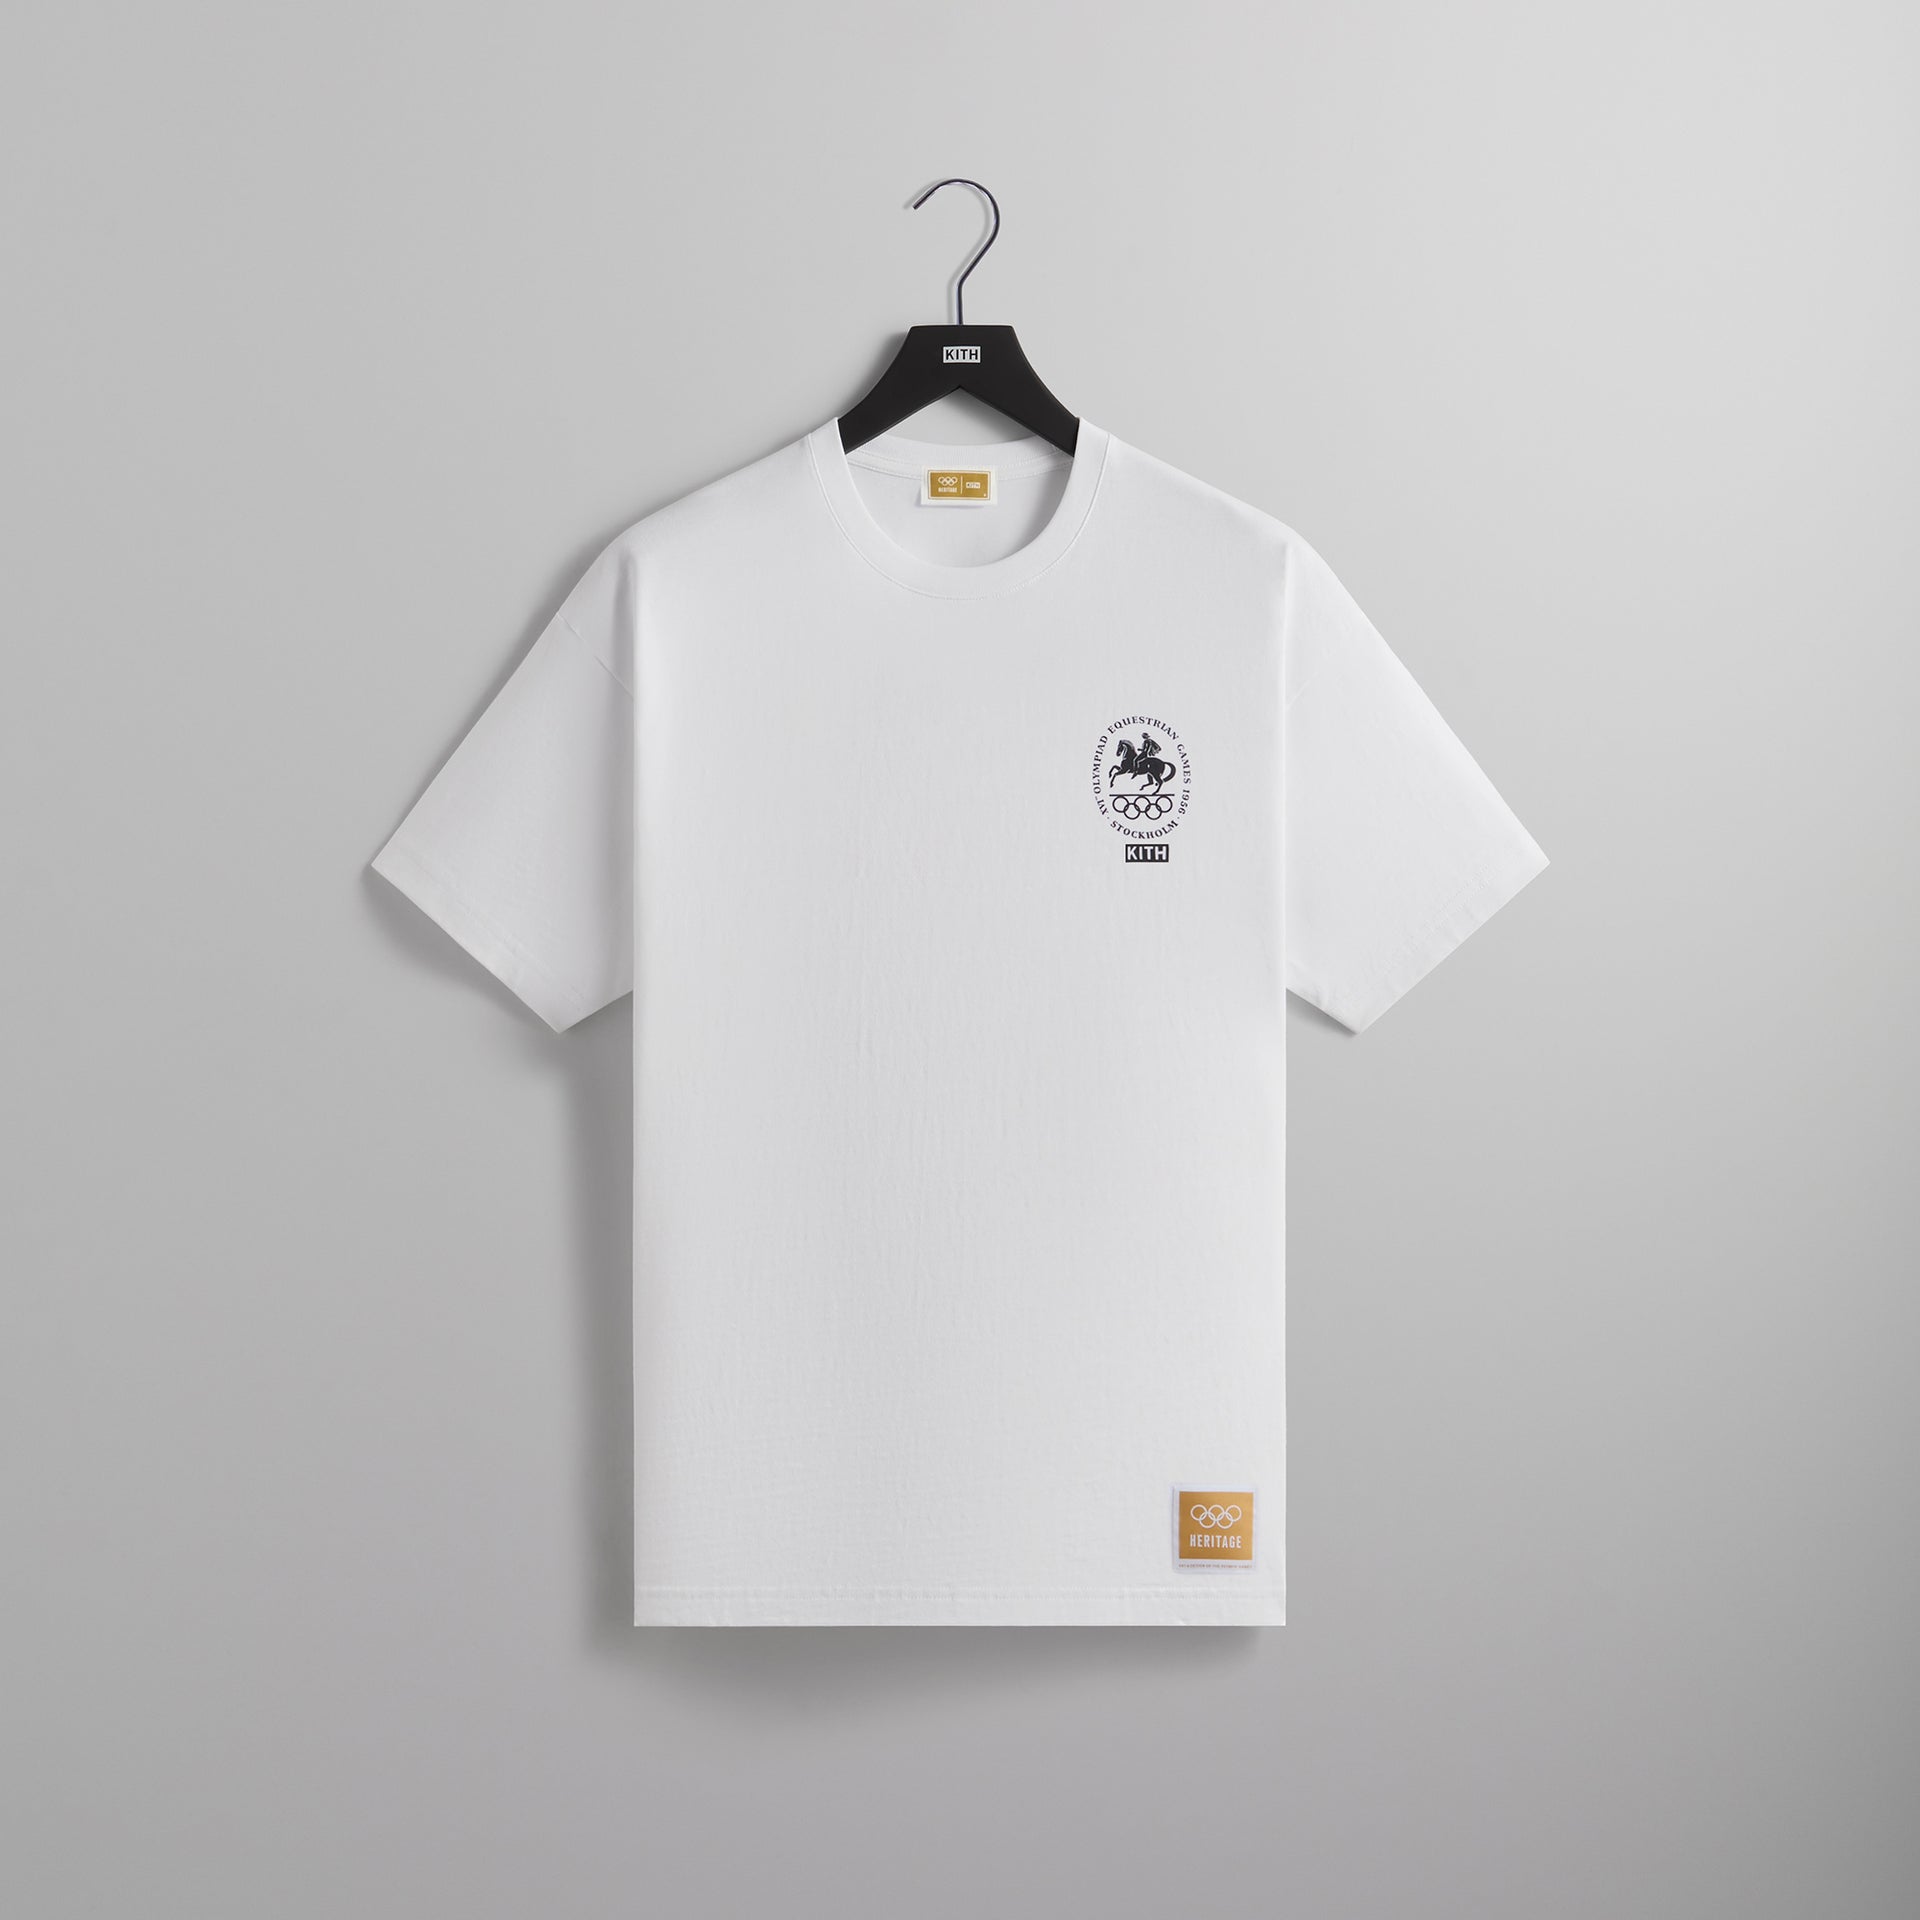 Kith for Olympics Heritage Stockholm 1956 Vintage Tee - White